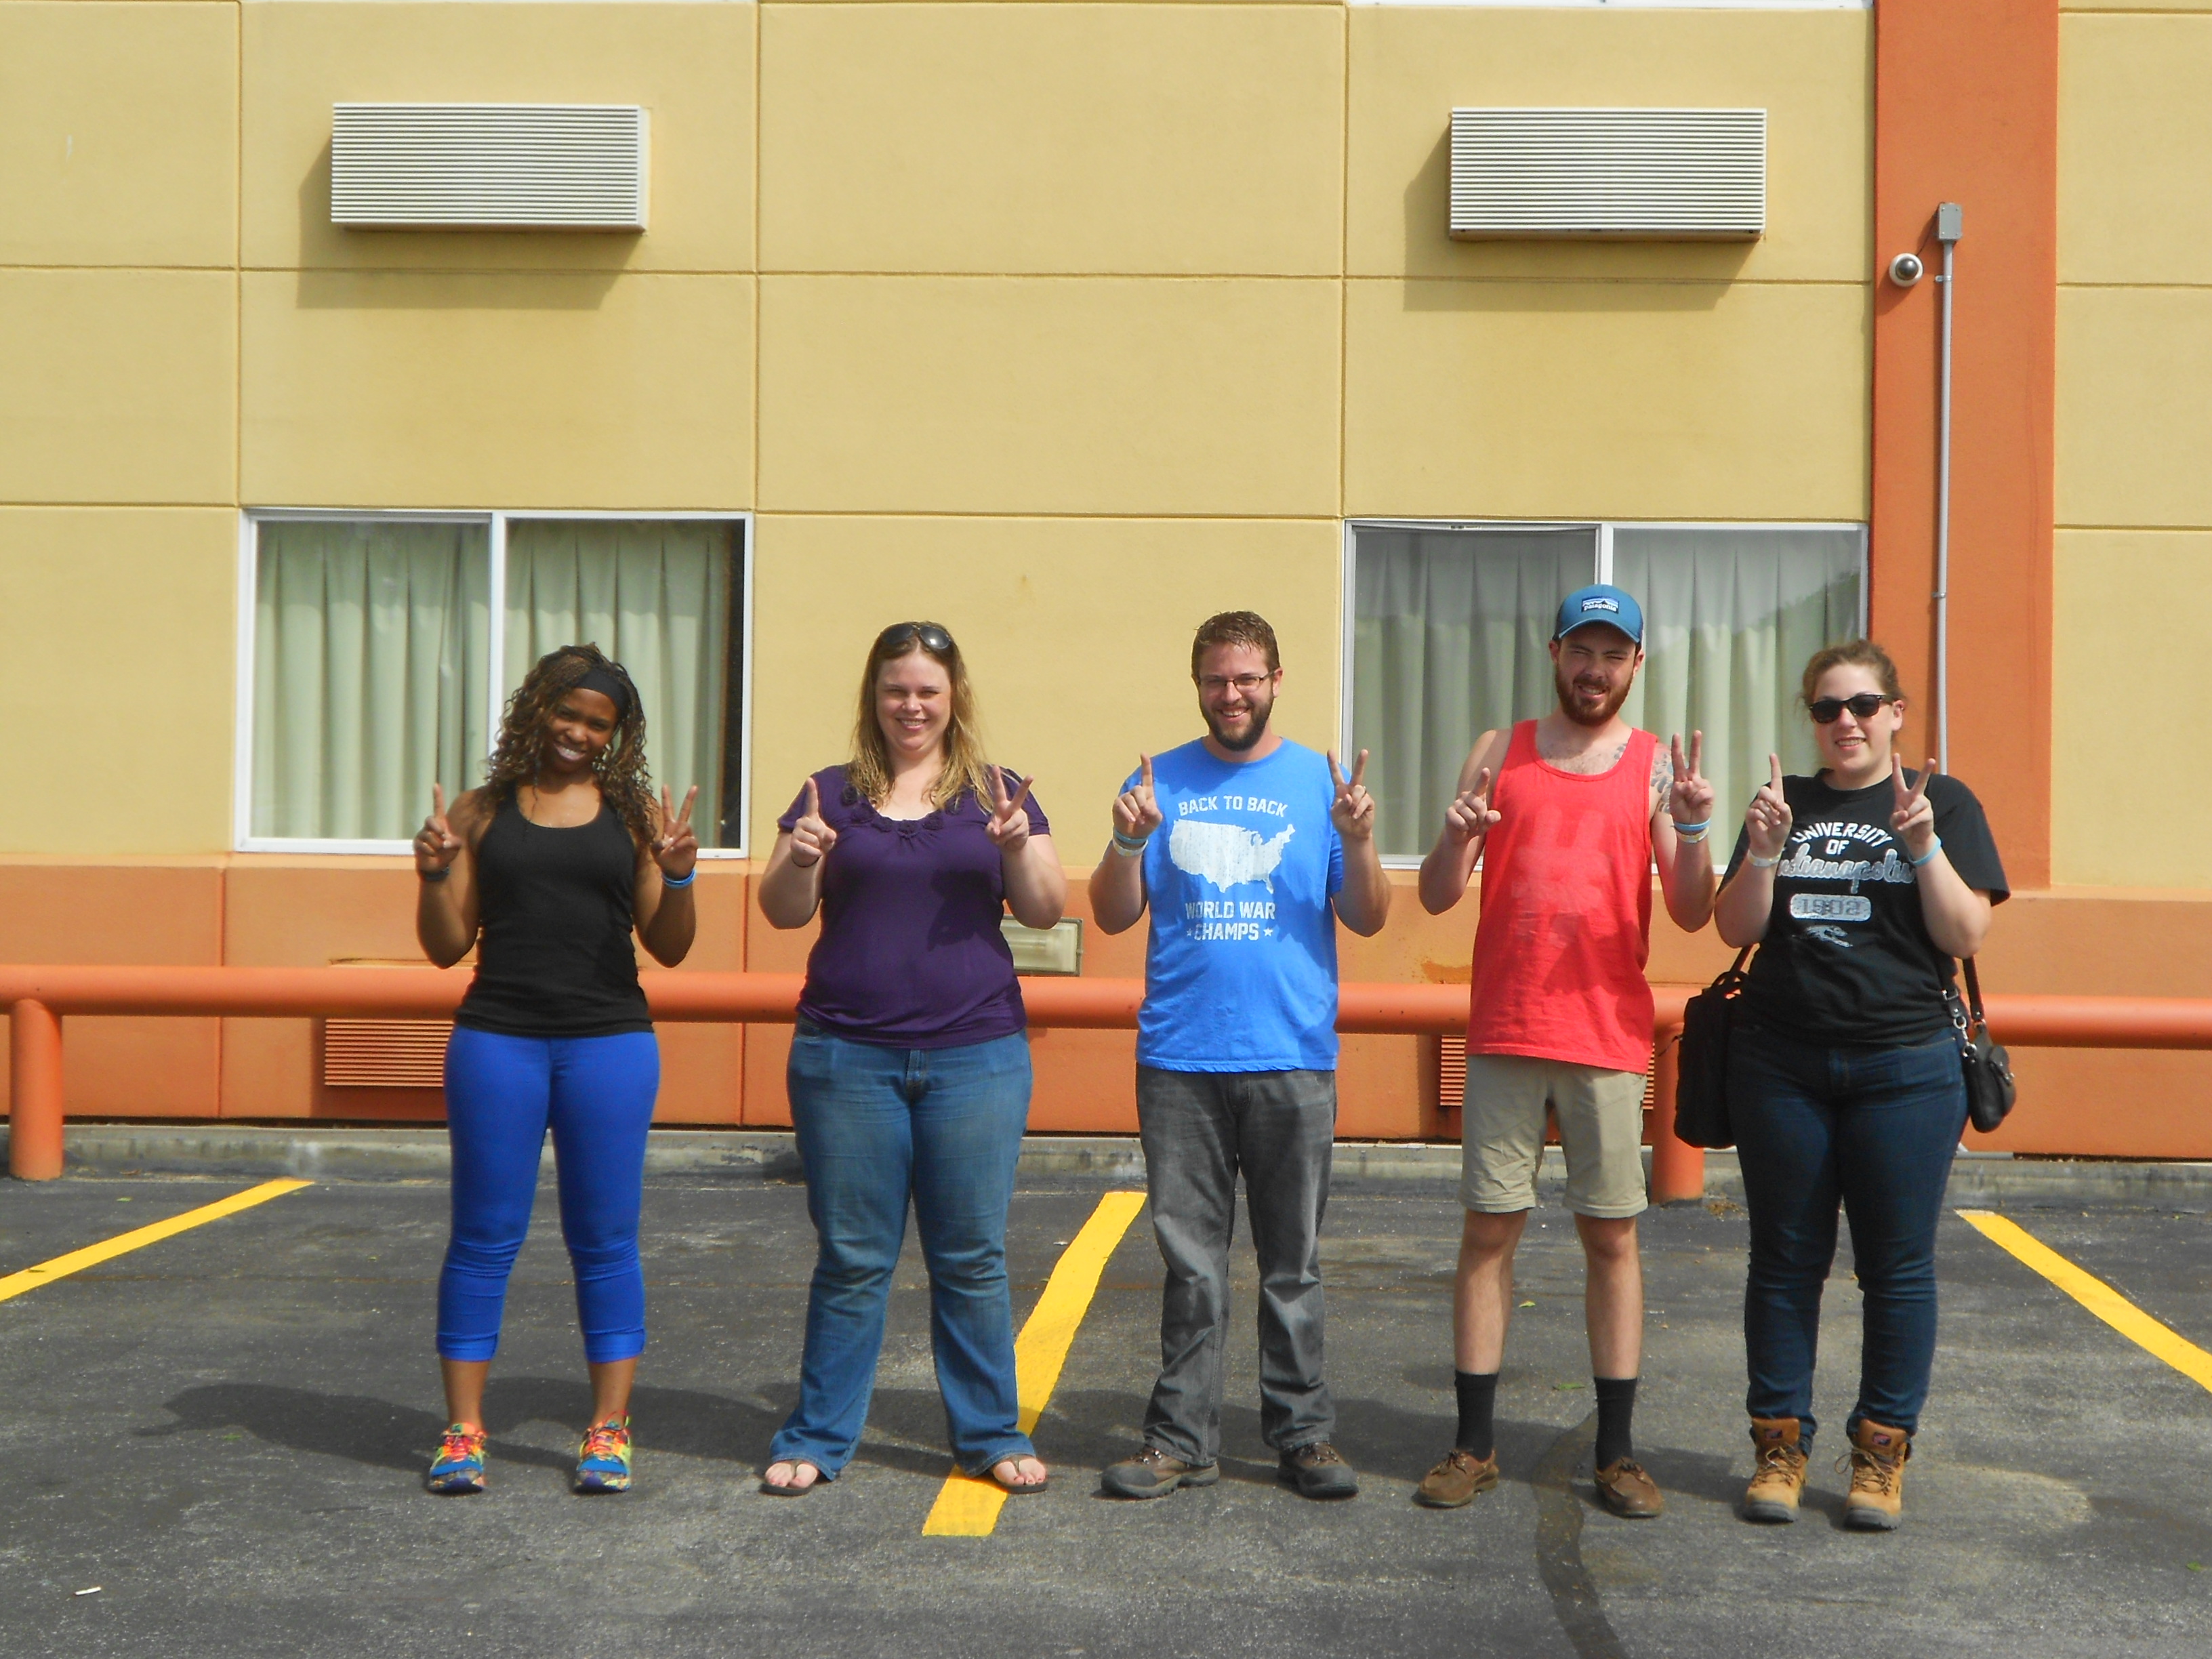 Group picture outside a yellow hotel with one finger raised on one hand and two fingers raised on the other hand